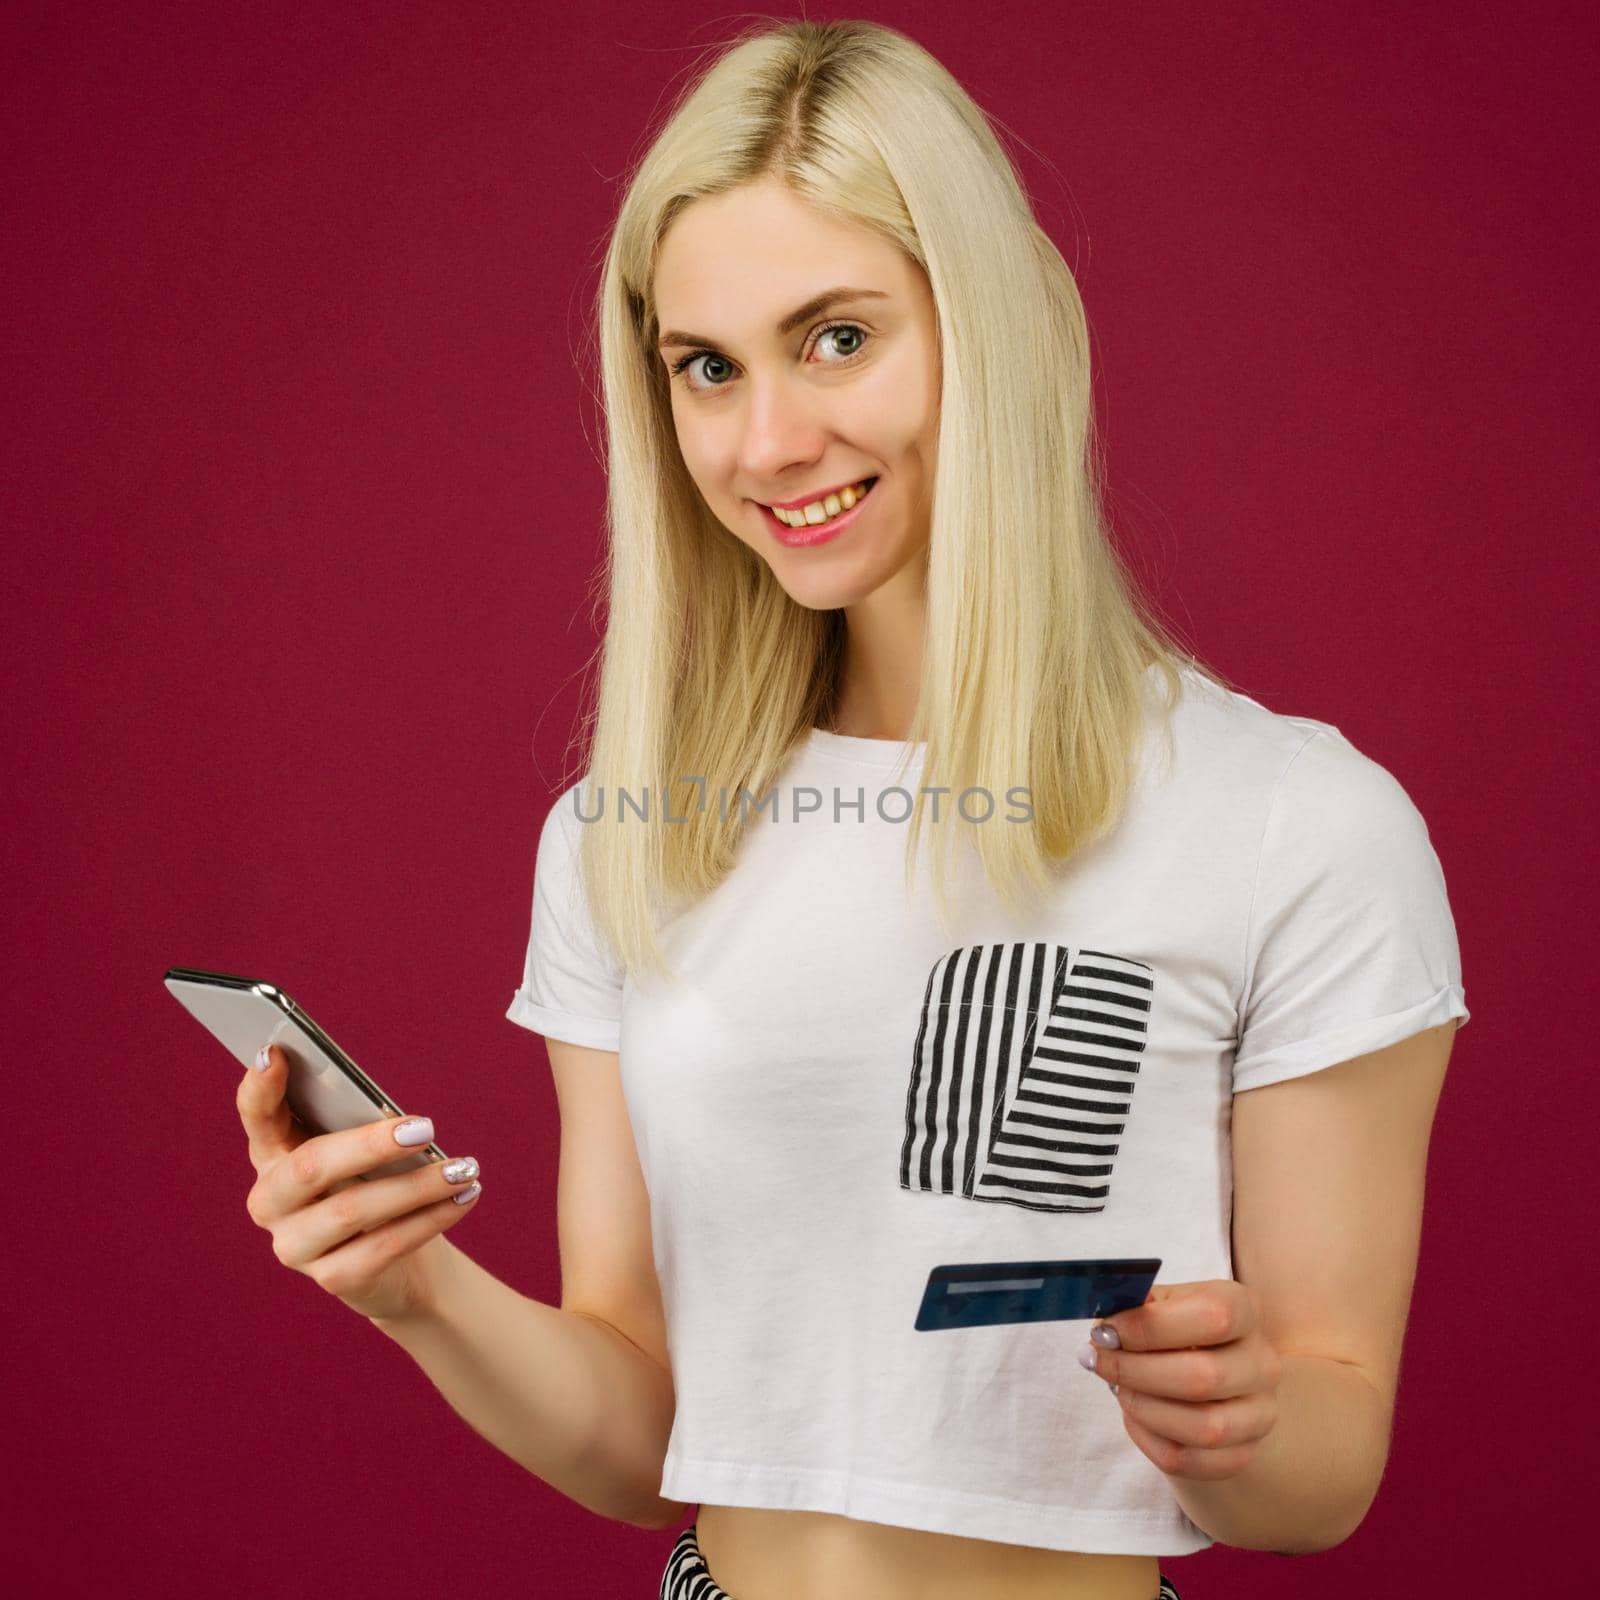 Young smiling woman buys online. Holds a smartphone and a credit card in hand on ruby background